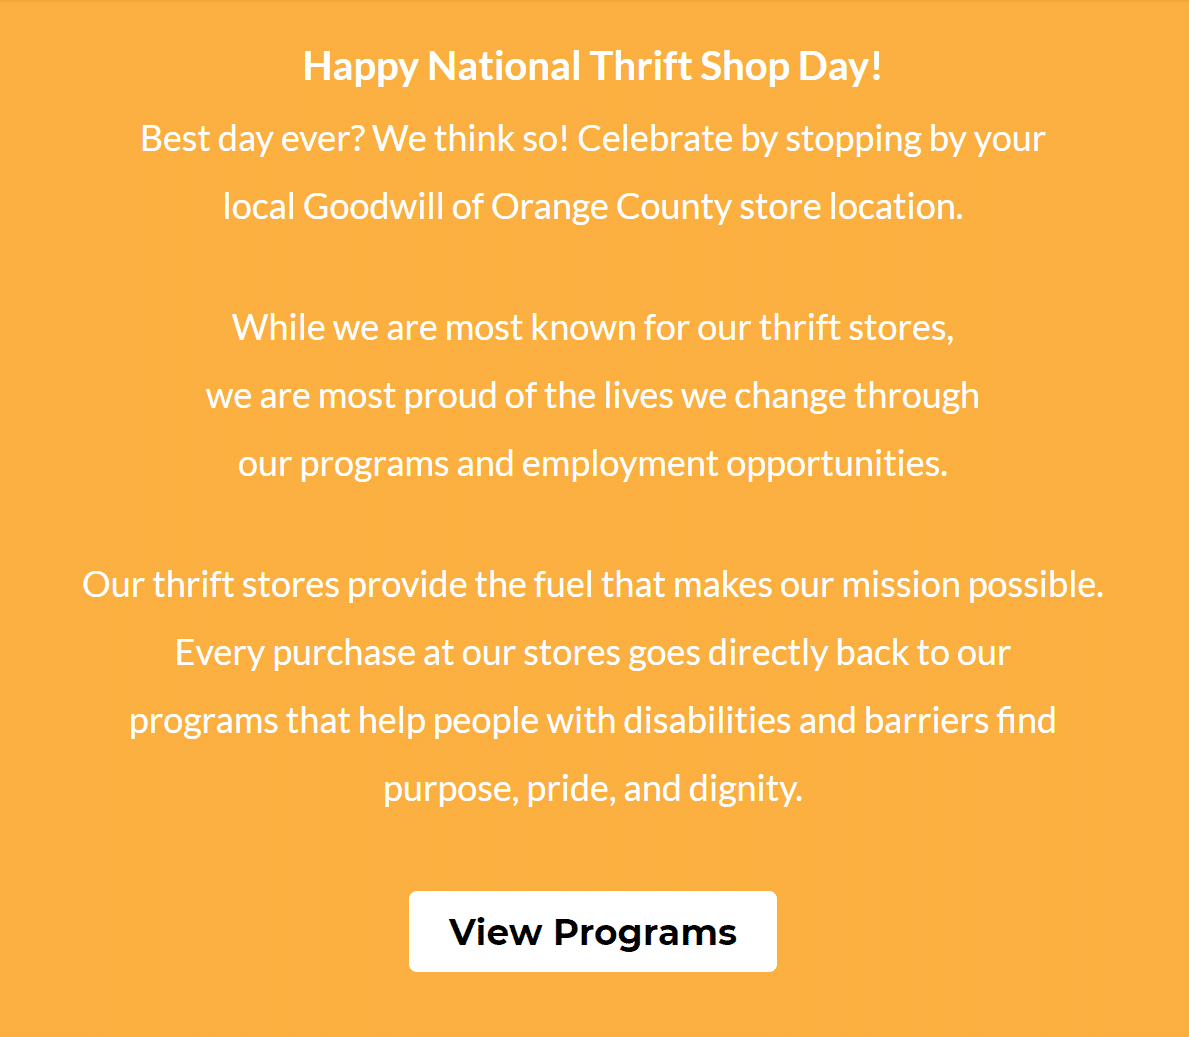 information on Happy thrift shop day